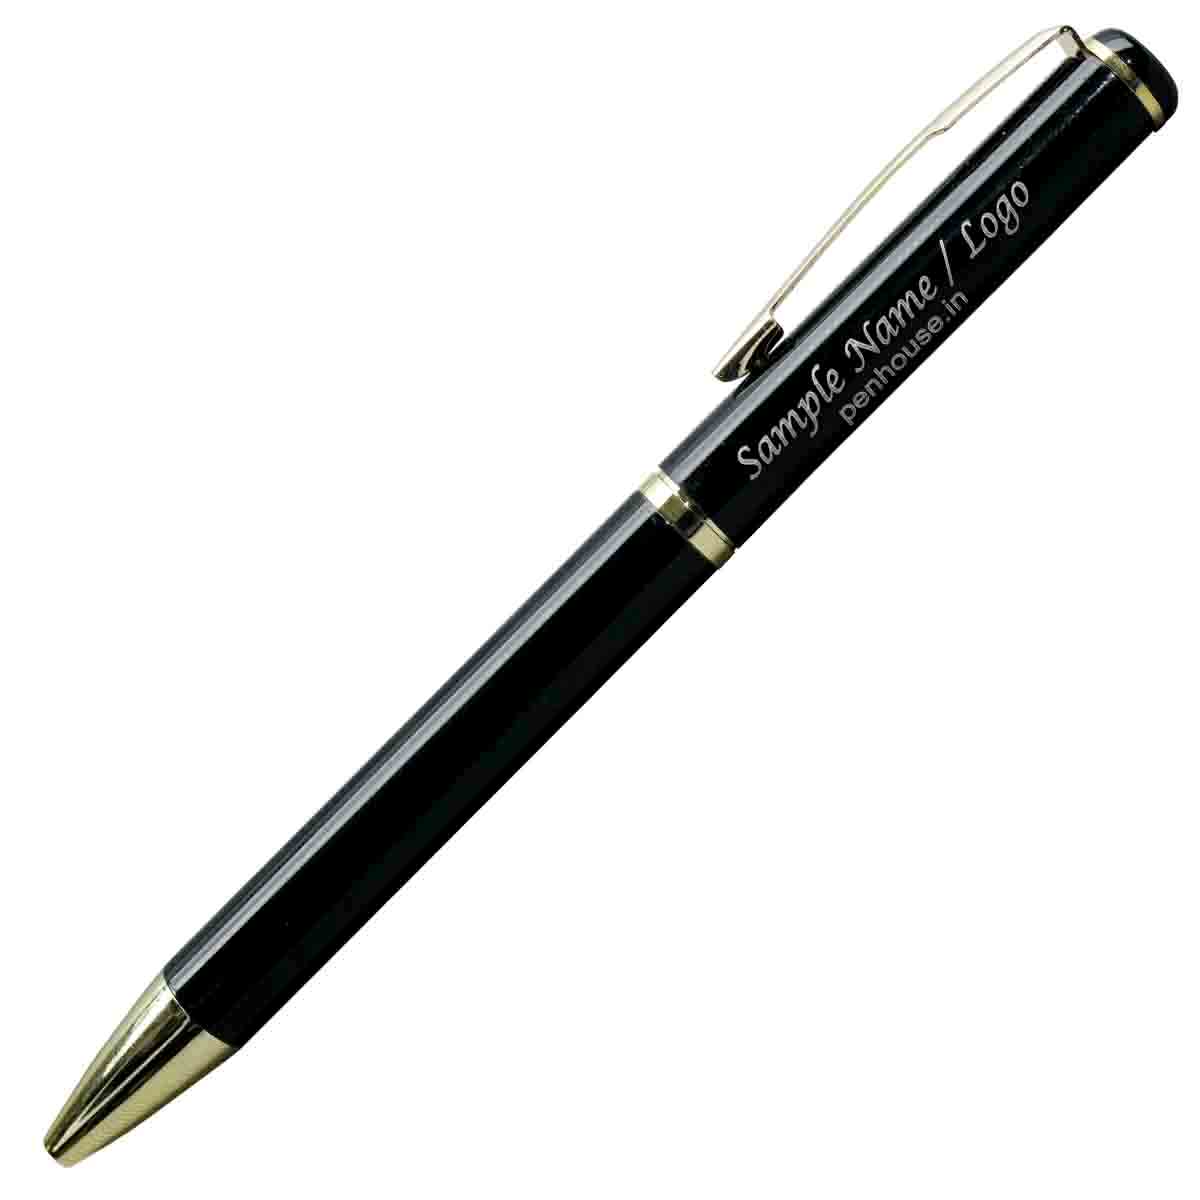 Penhouse.in Full Black Color Body With Gold Clip   Twist Type Ball Pen With Personalised Gift Box  SKU 19579